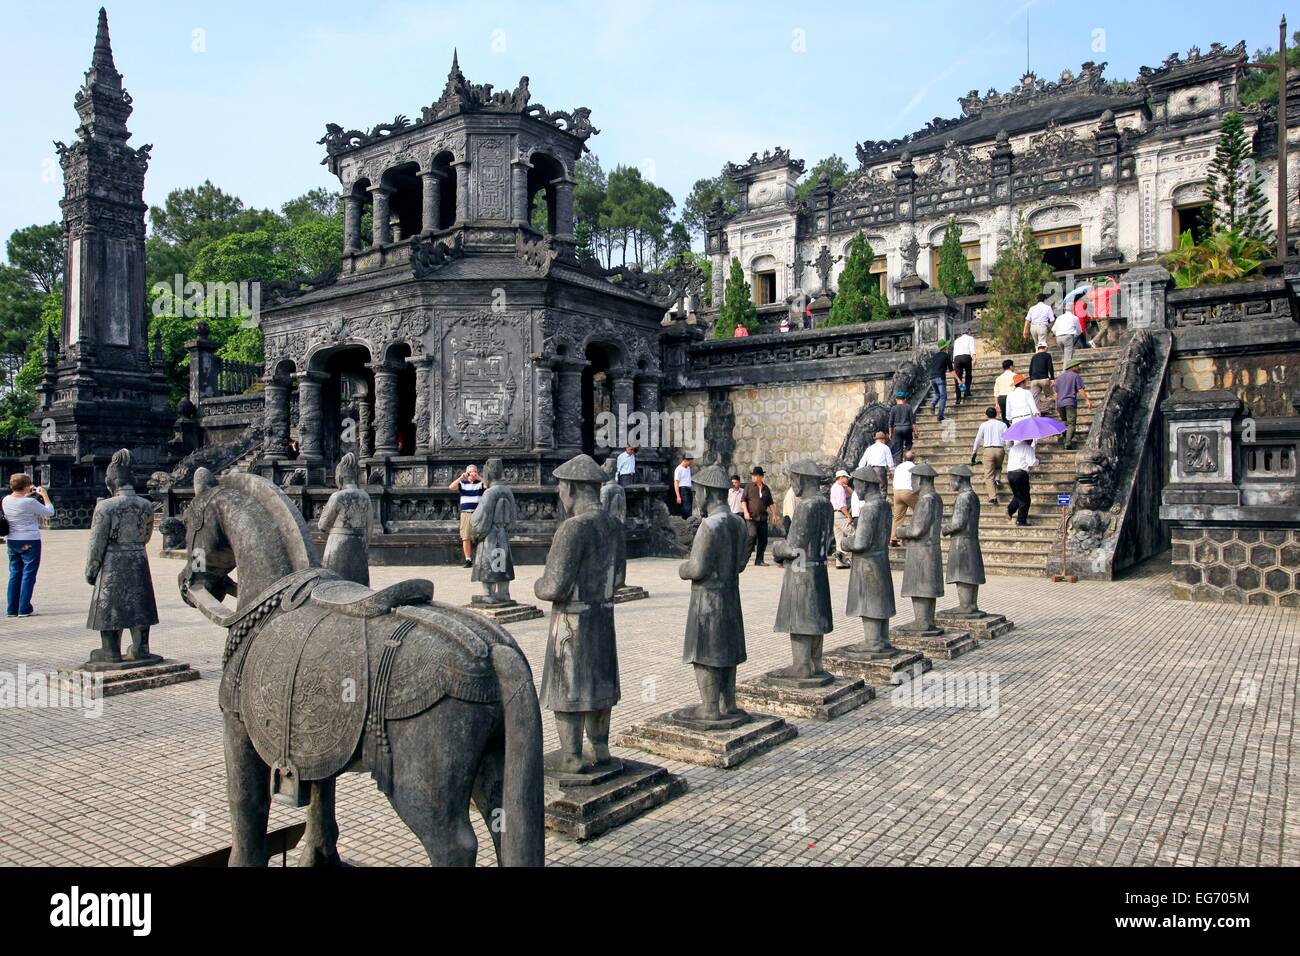 Horse and Mandarin statues at the Tomb of Khai Dinh in Hue, Vietnam. Stock Photo